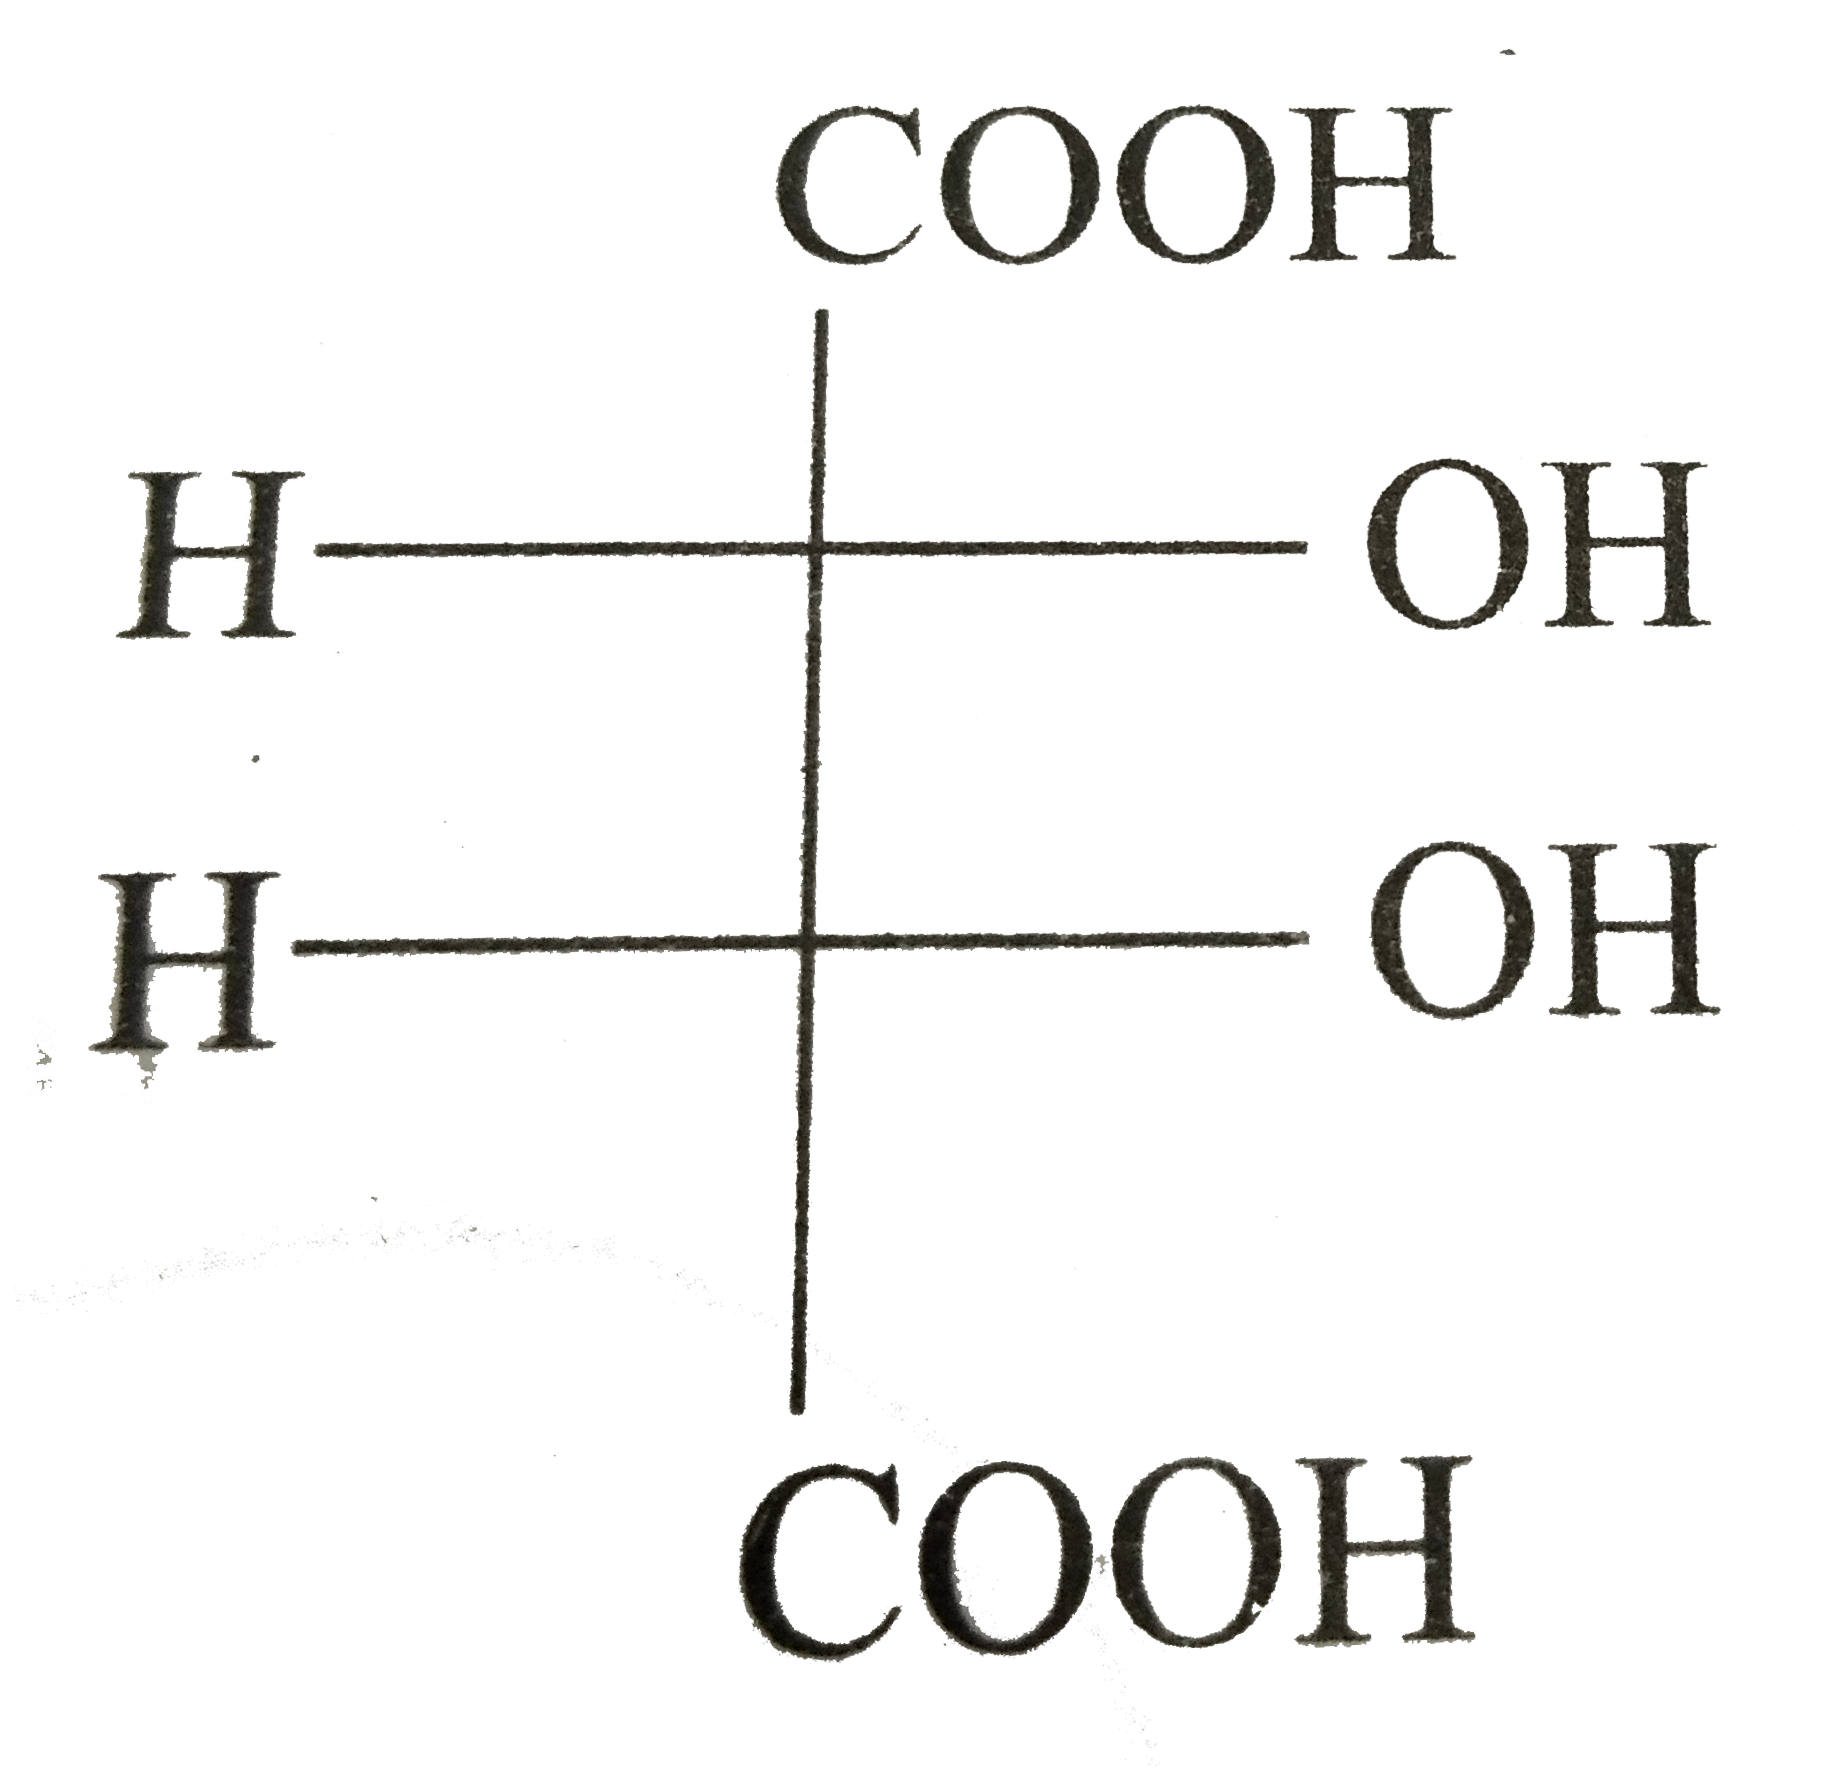 Following stereo-structure of trataric acid represents